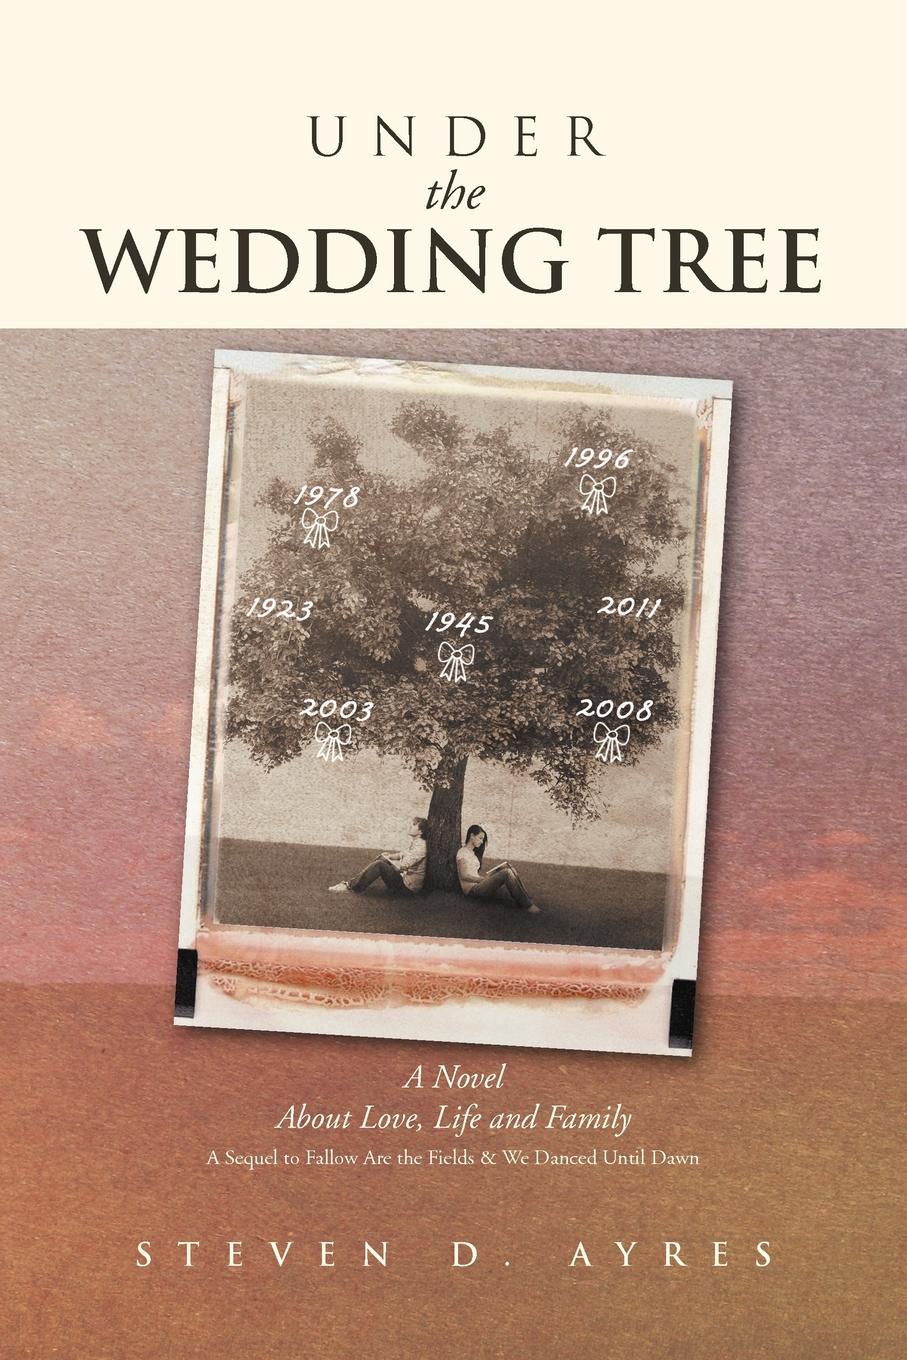 Under the Wedding Tree. A Sequel to Fallow Are the Fields & We Danced Until Dawn